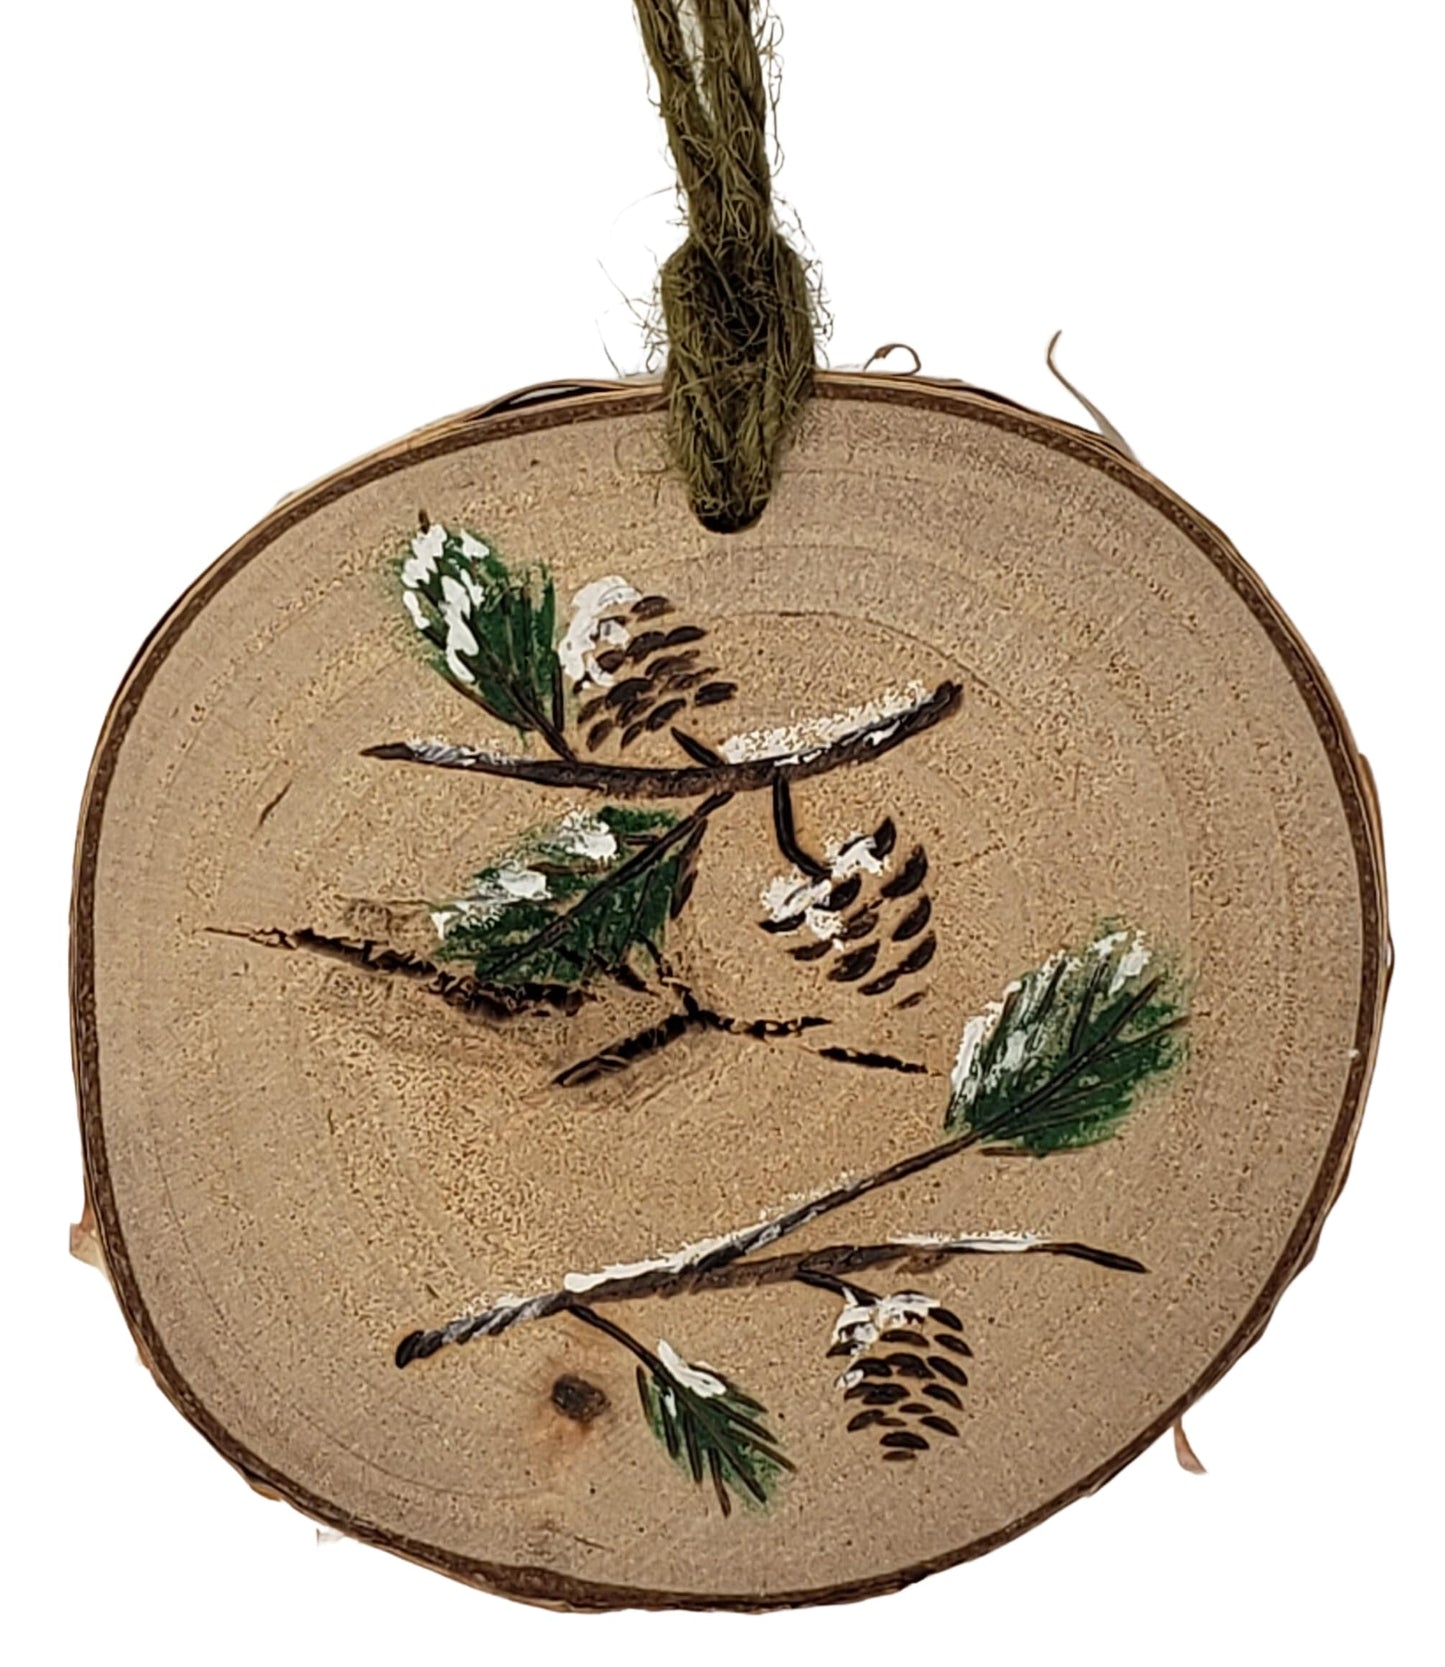 Natures Christmas- medium wood burned and hand painted pine bough Christmas tree ornament on birch wood